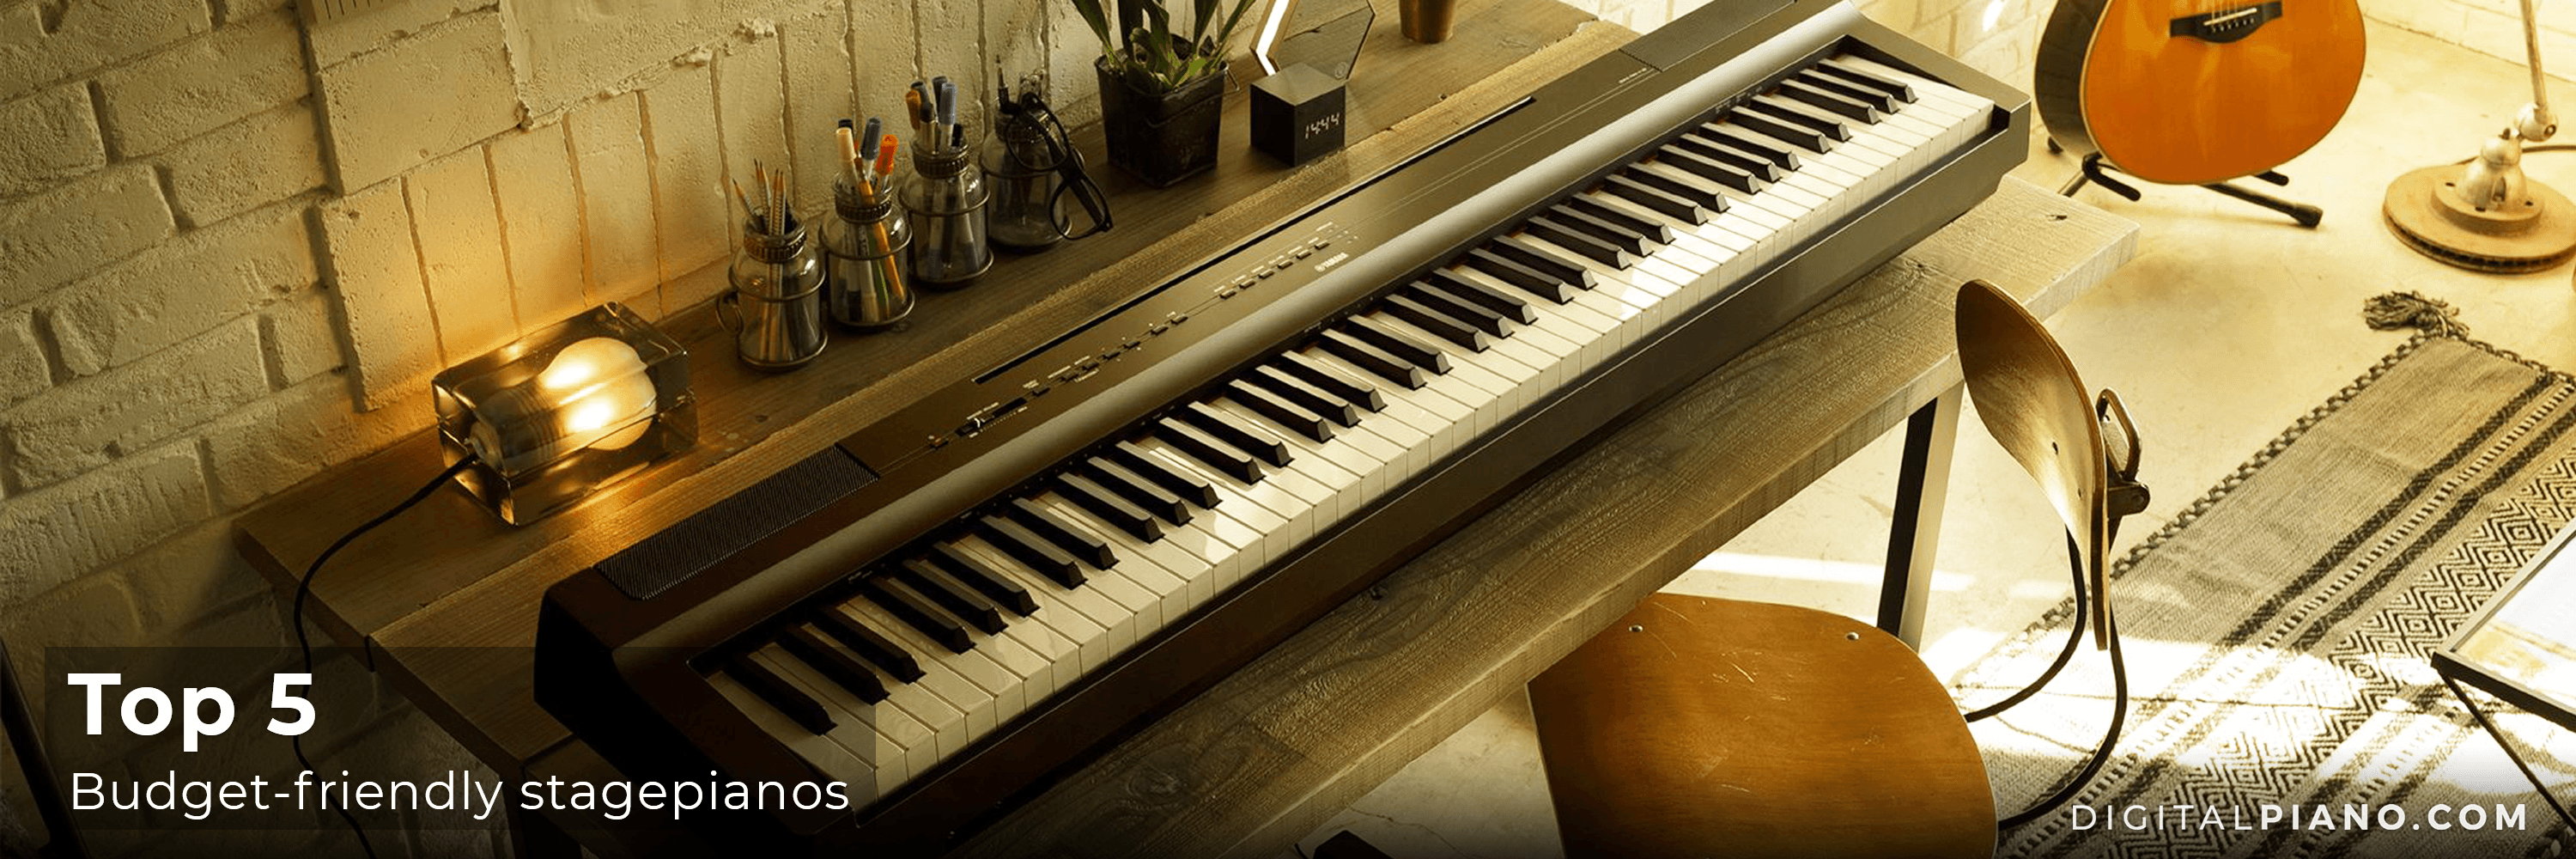 Top 5 - Budget-friendly stagepianos